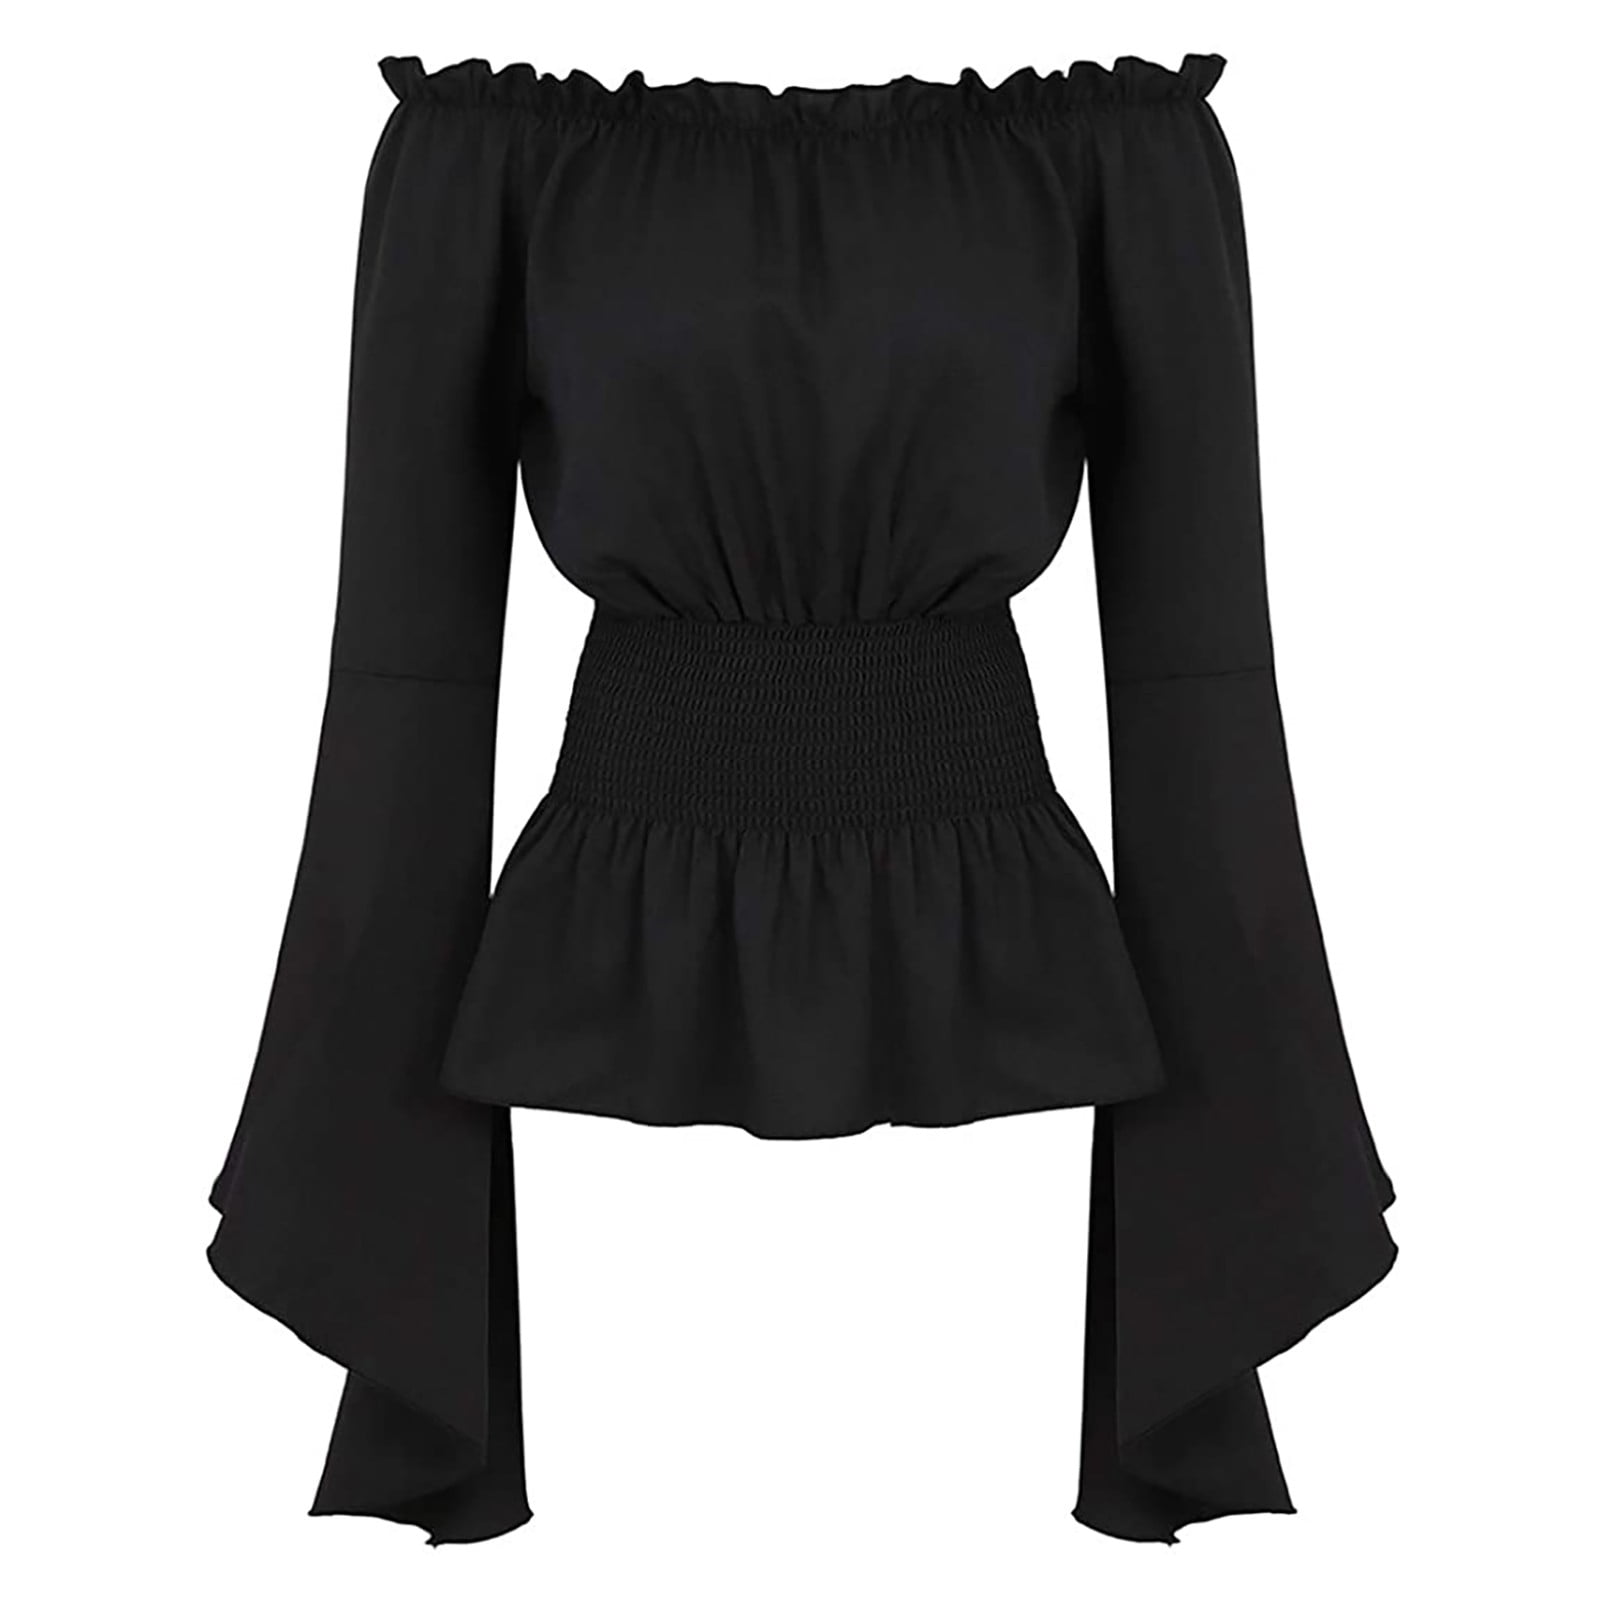 Womens Gothic Renaissance Blouse Flare Sleeves Ruffles Off Shoulder Corset Tops Medieval Victorian Cosplay Costume Pirate Shirt Fashion Women Tops 